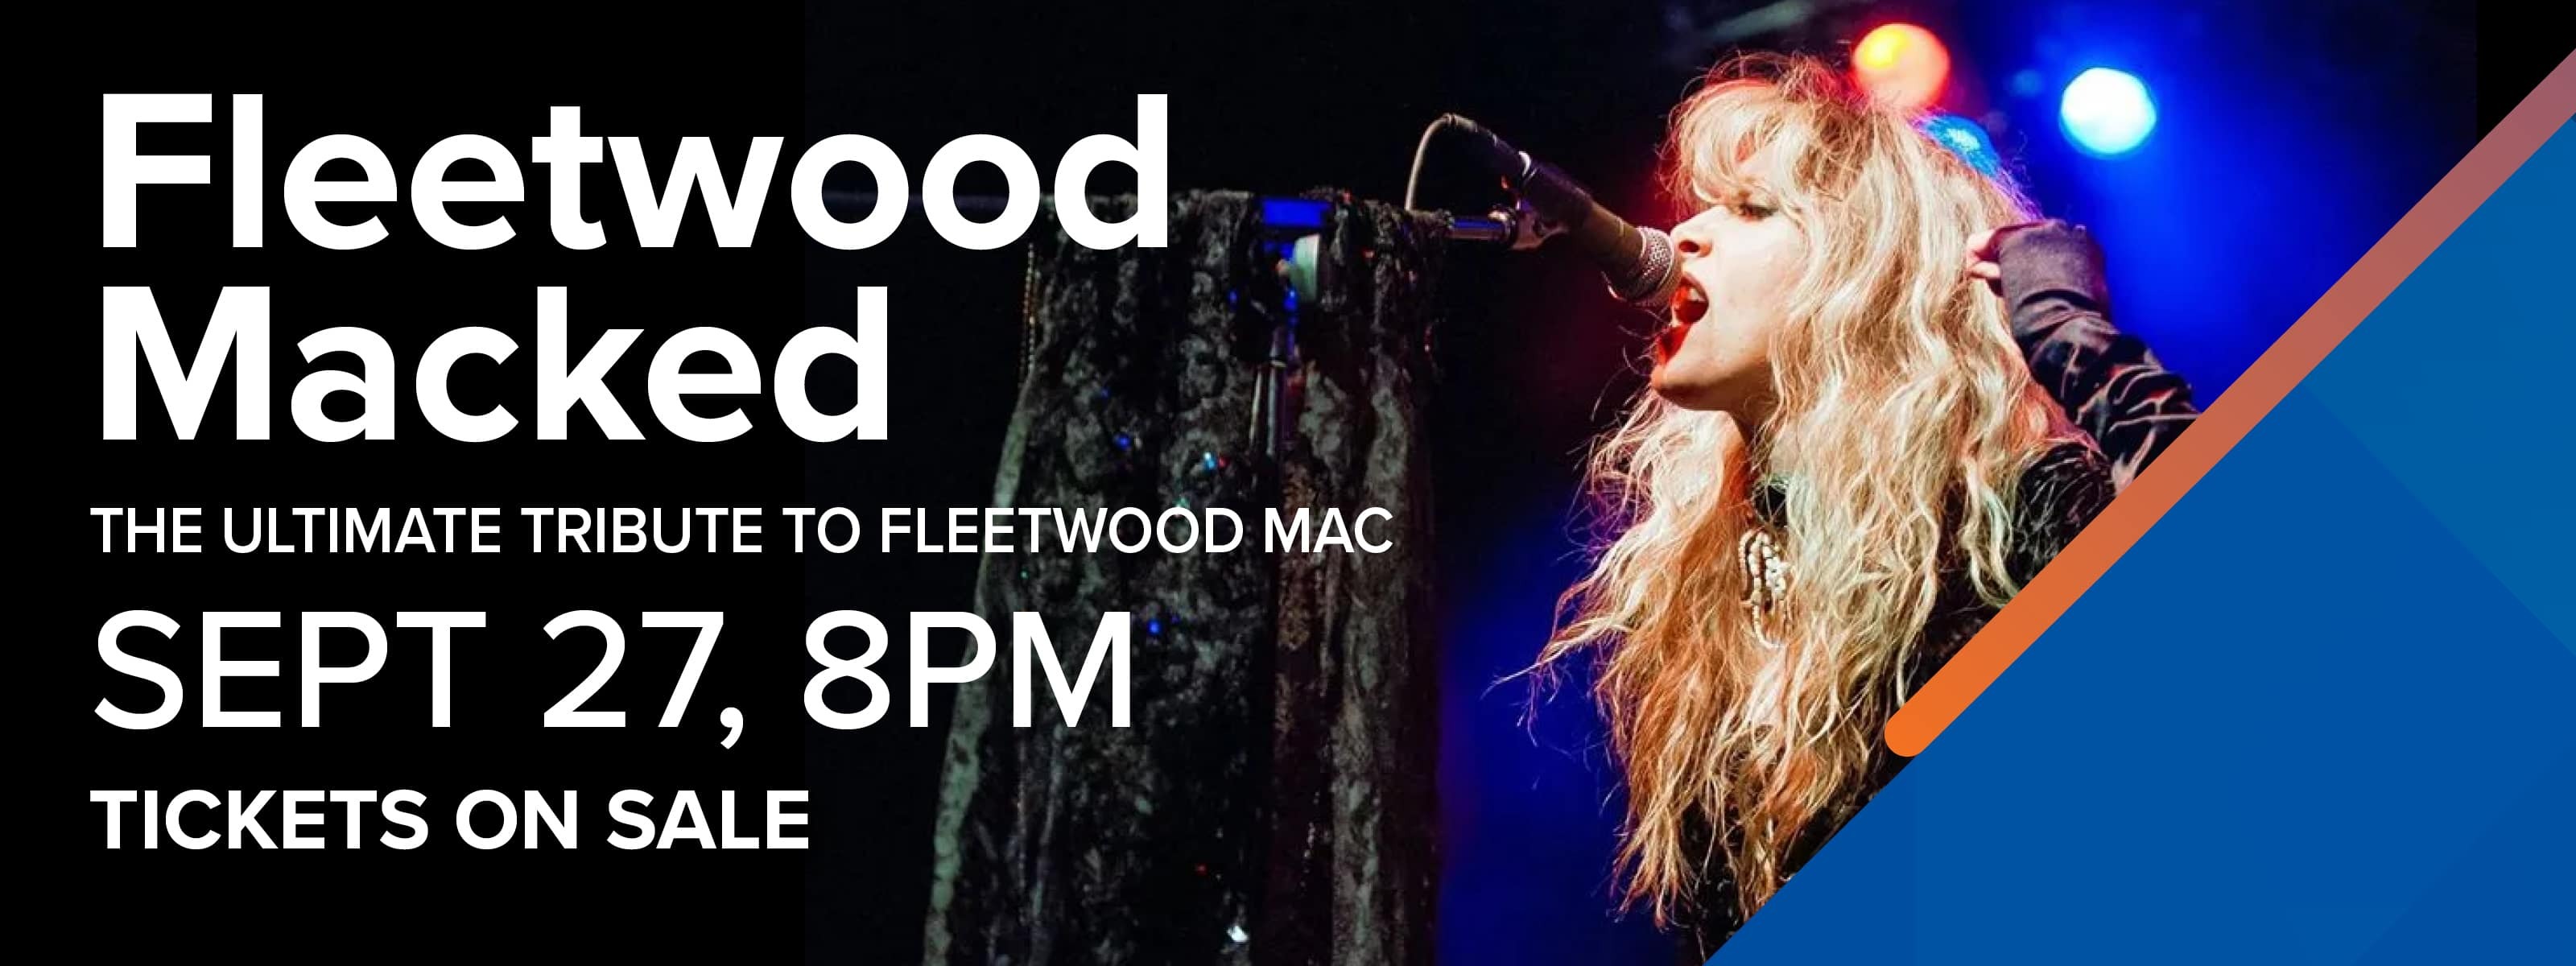 Fleetwood Macked: The Ultimate Fleetwood Mac Tribute - September 27, 8:00pm Tickets On Sale Now